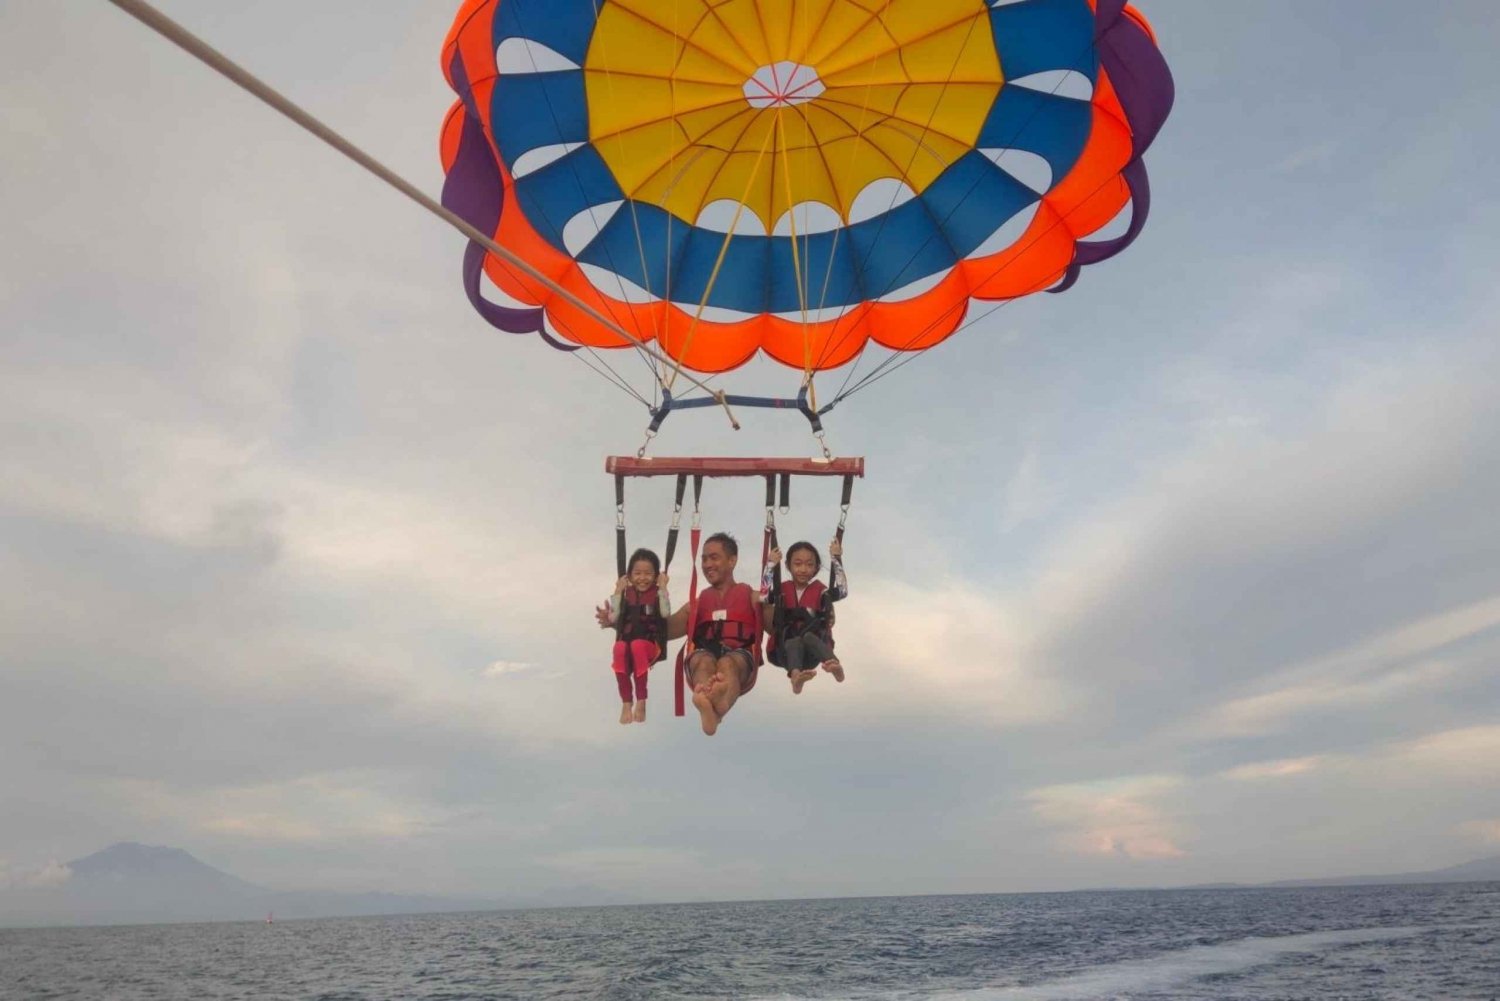 Bali: Water Sports Packages with Pickup Included